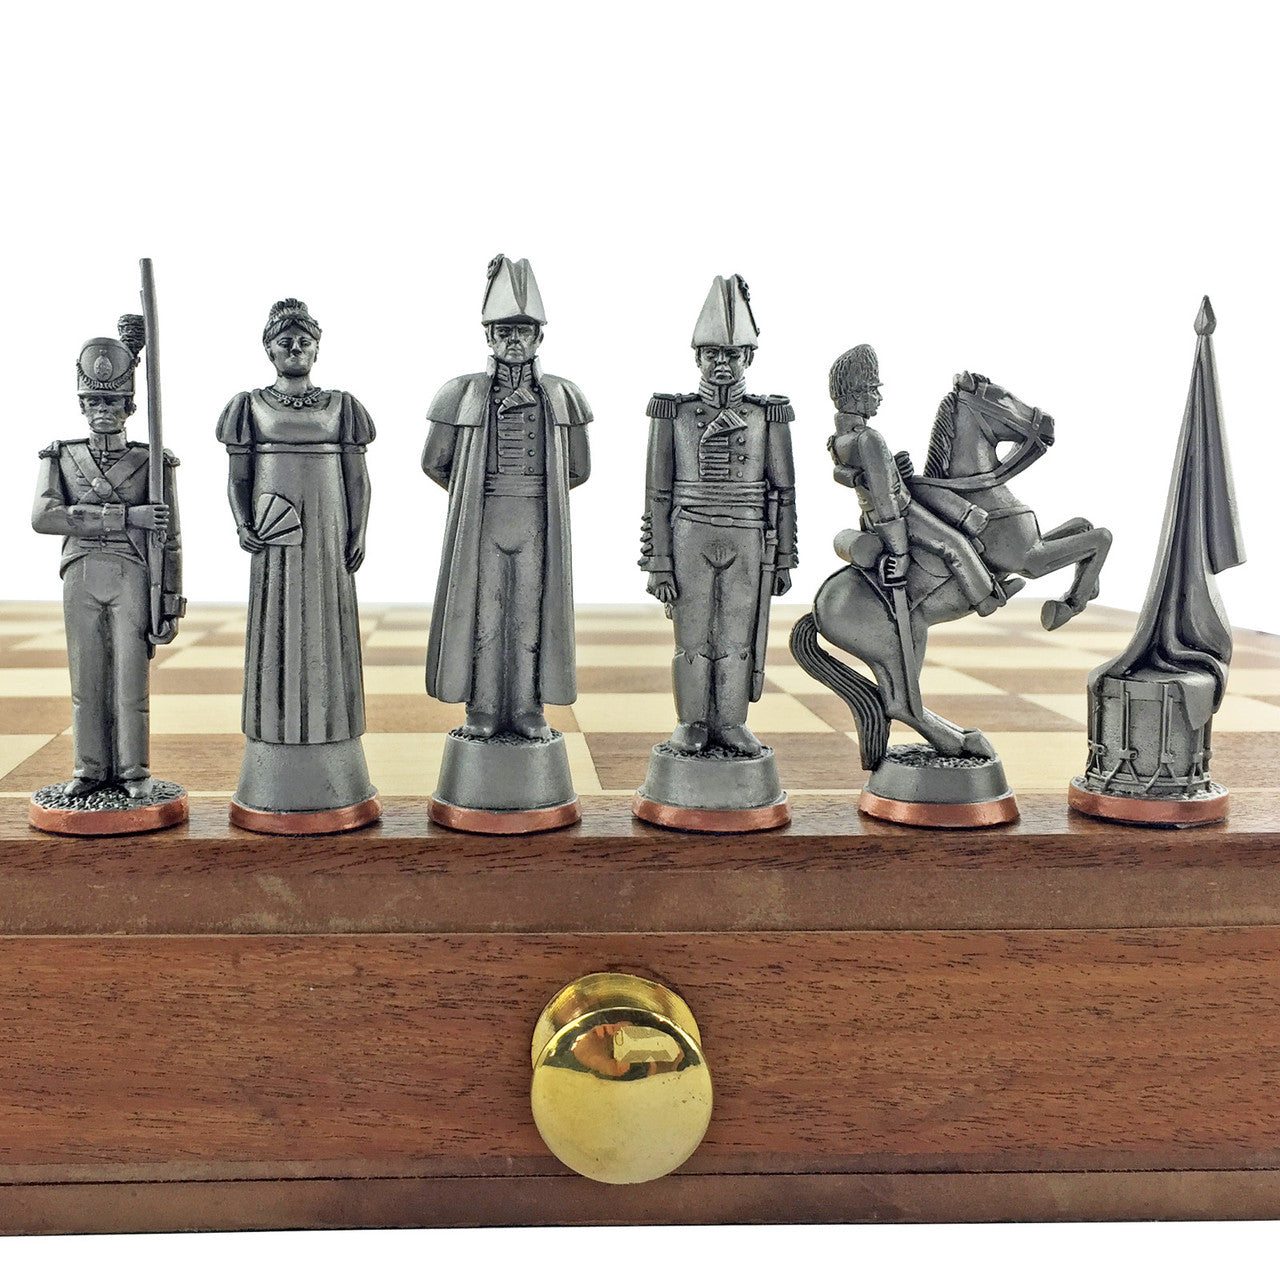 Toy soldier chess set Battle of Waterloo.